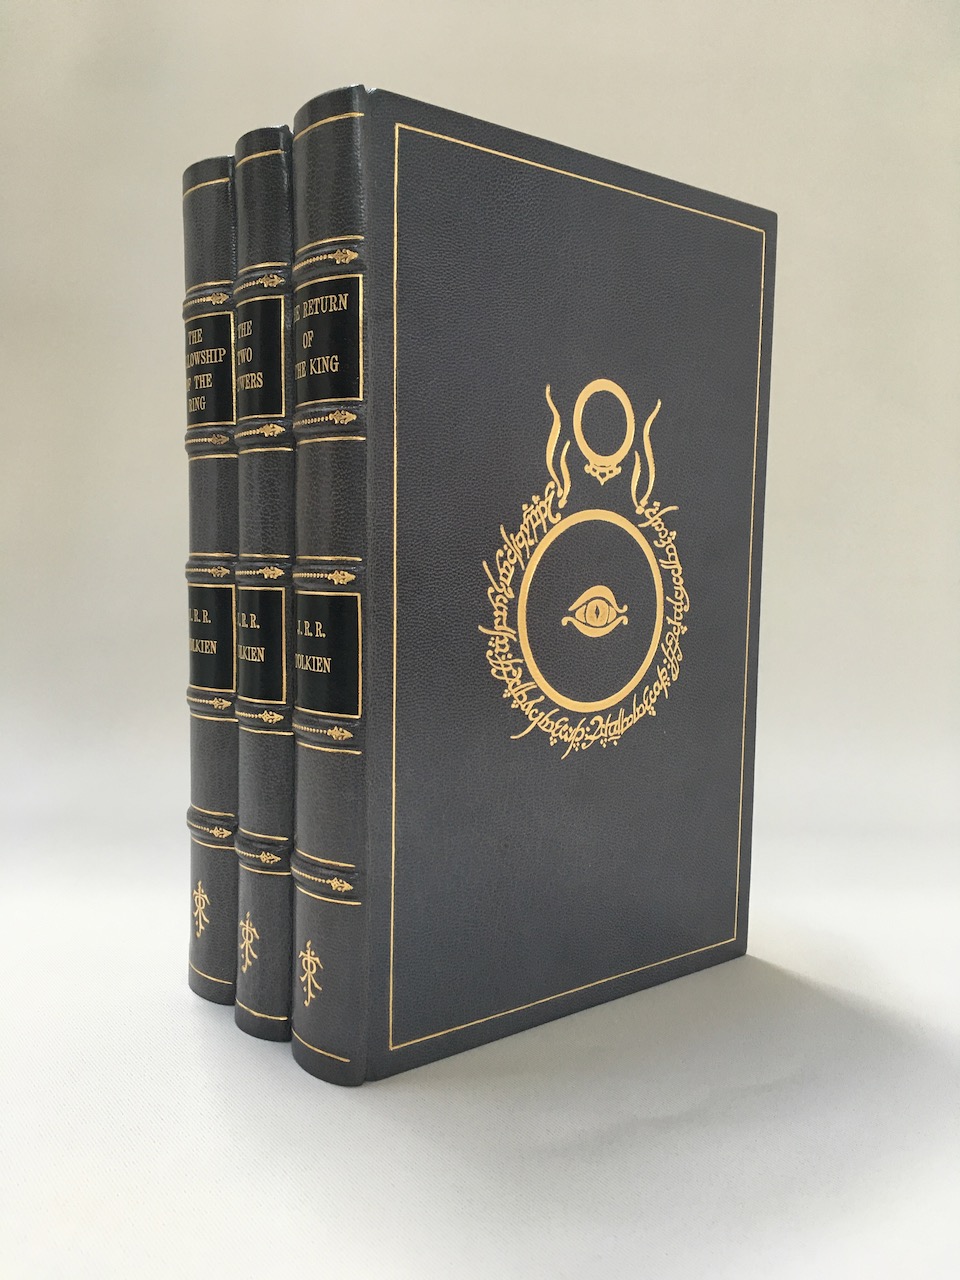 The true 1st Printing of the Lord of the Rings, a beautiful rebound set, executed by Temple Bindery, Temple Bookbinders of Oxford